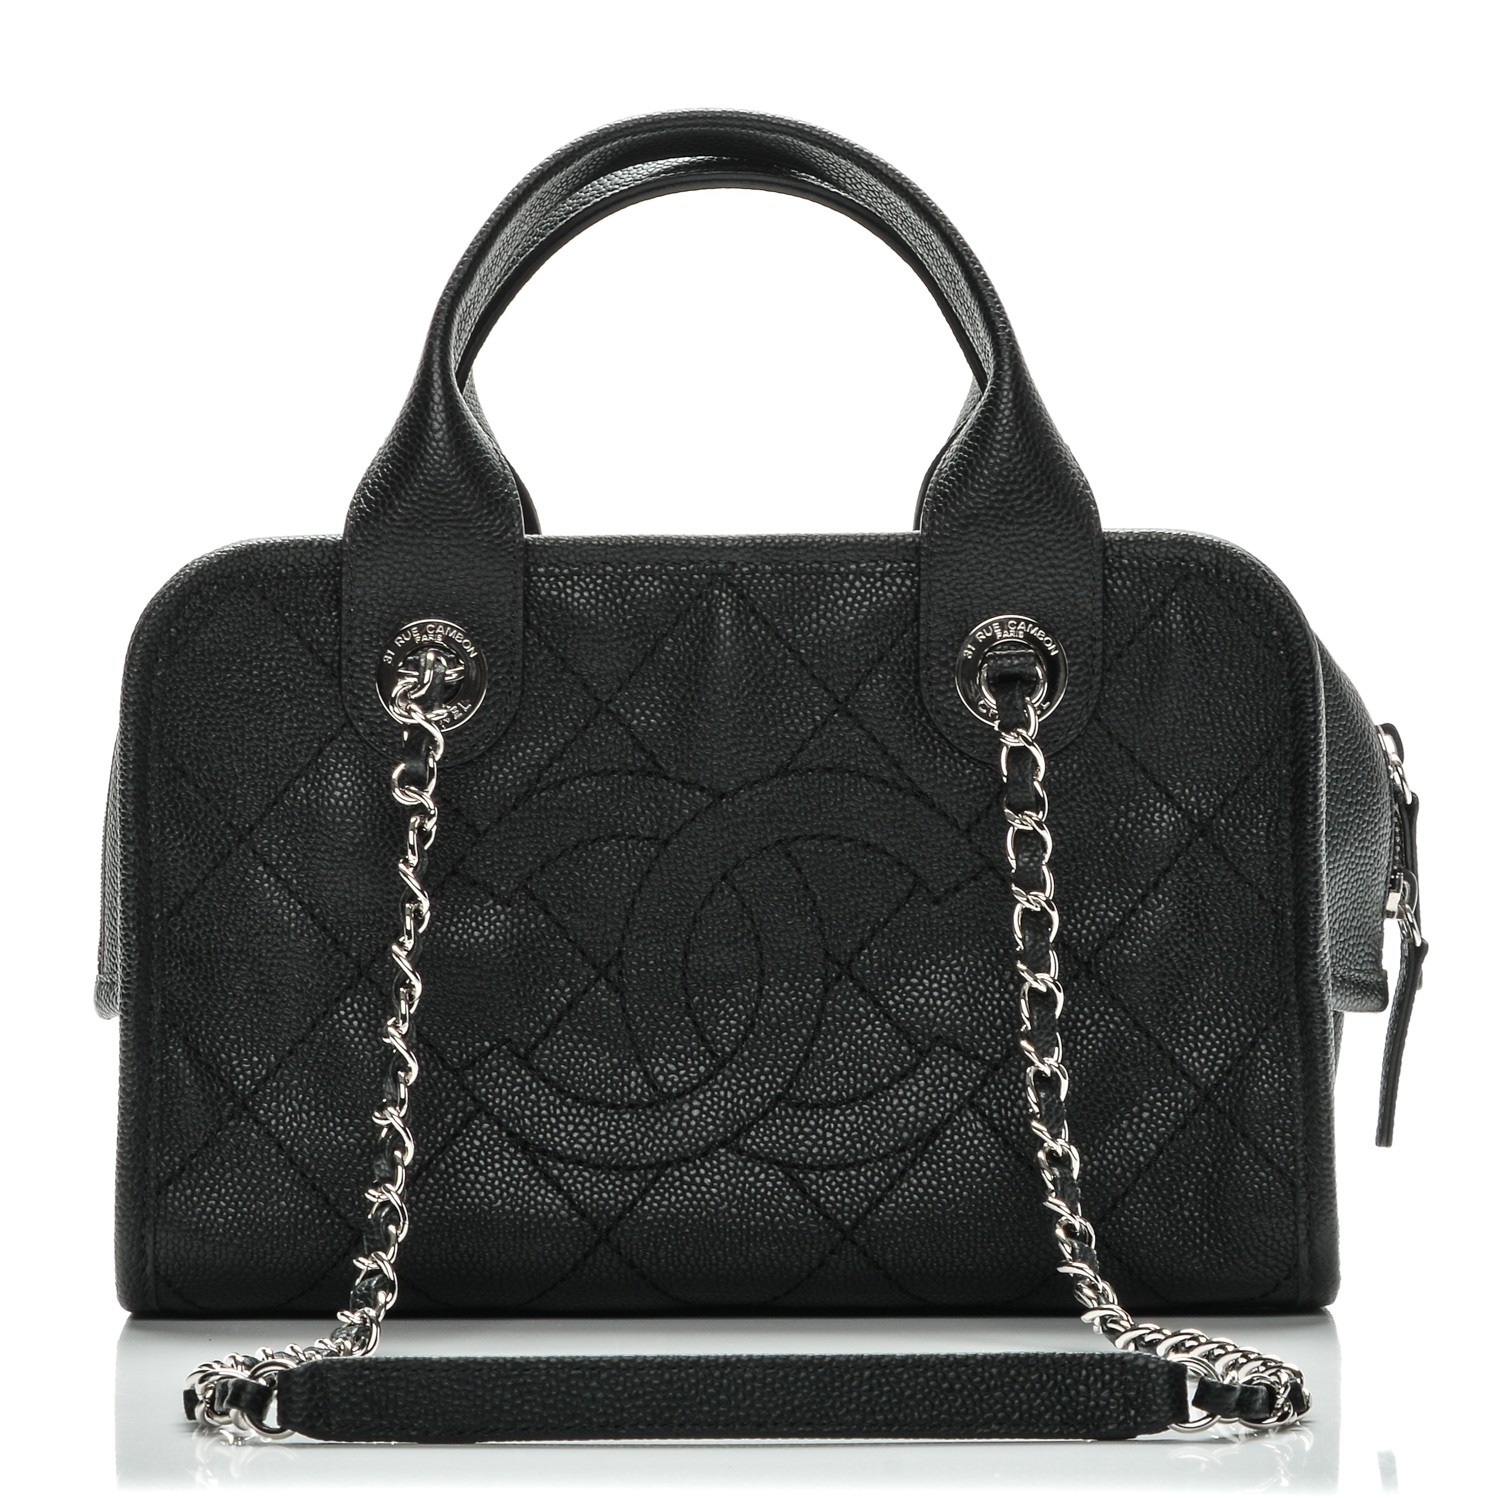 CHANEL Caviar Quilted Small Deauville Bowling Bag Black 198340